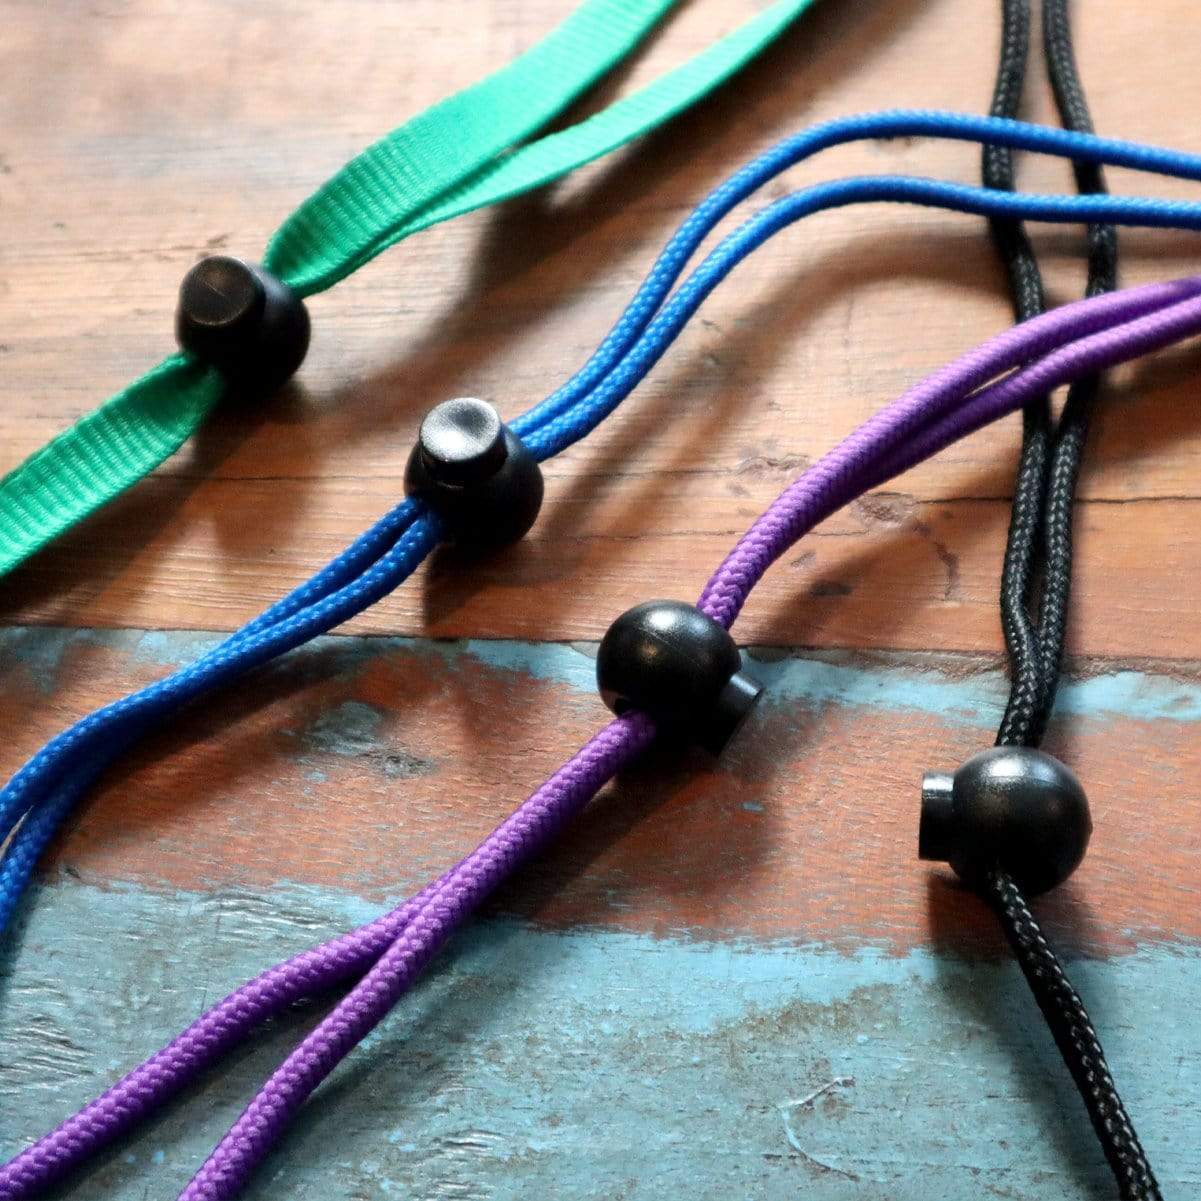 Four Adjustable Cord Lock - Round Ball Style - Single Hole End Toggle for DIY Projects (2135-4001) in green, blue, purple, and black are laid out on a wooden surface.